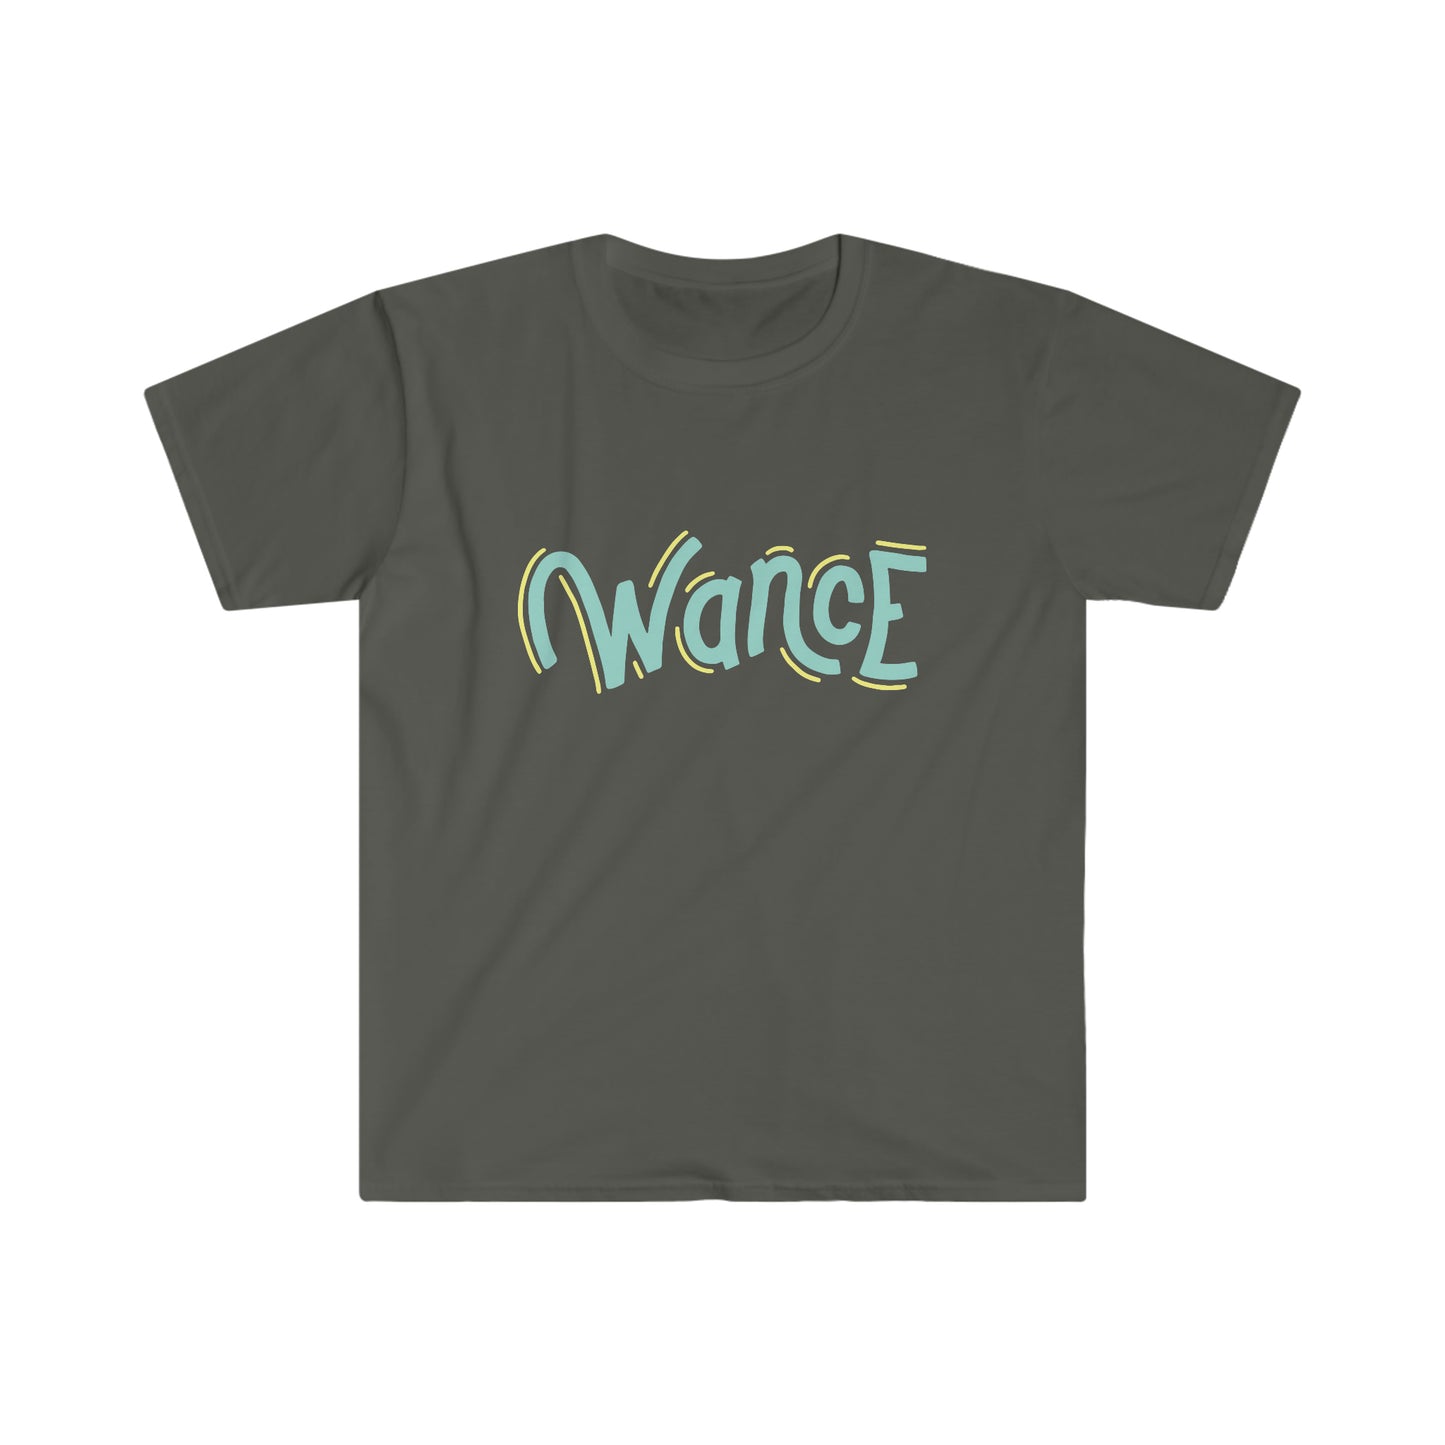 WANCE (teal & yellow) Unisex Softstyle T-Shirt